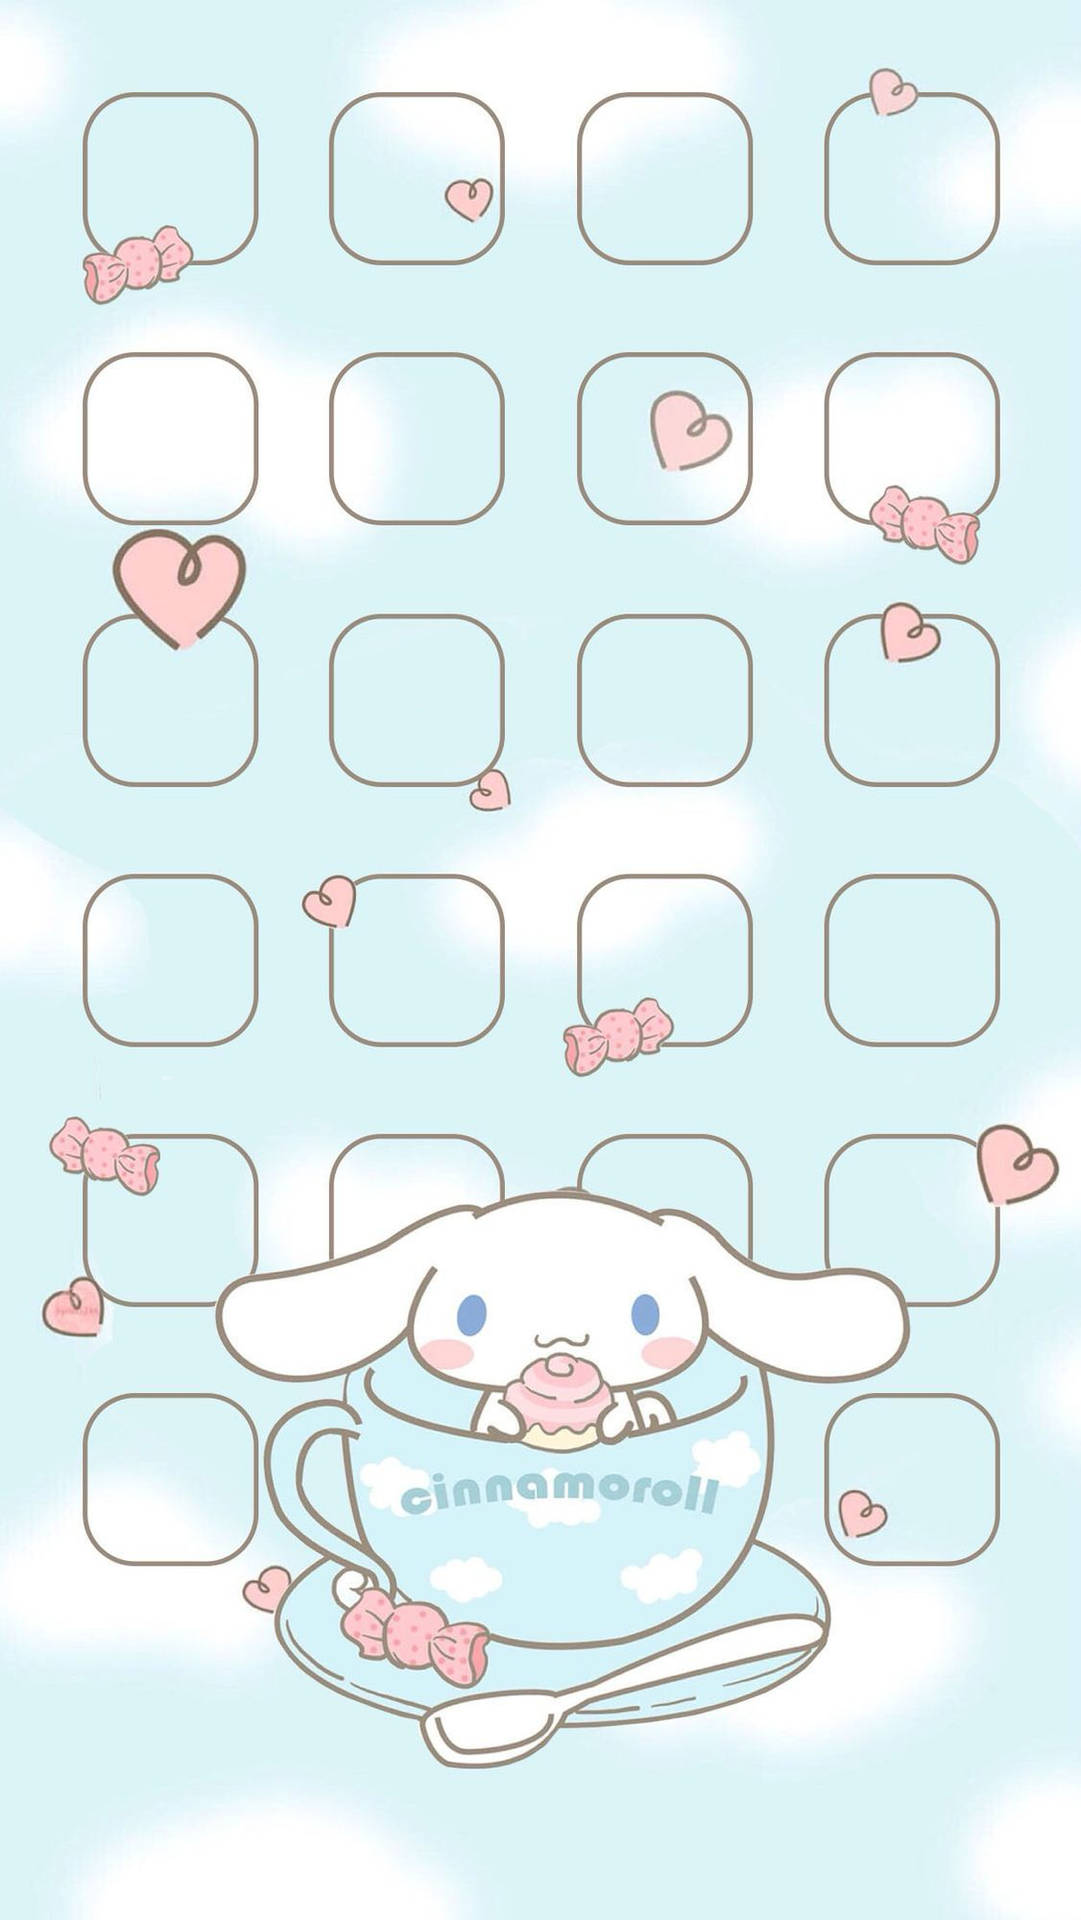 "Show some love for Sanrio with these adorable characters!" Wallpaper